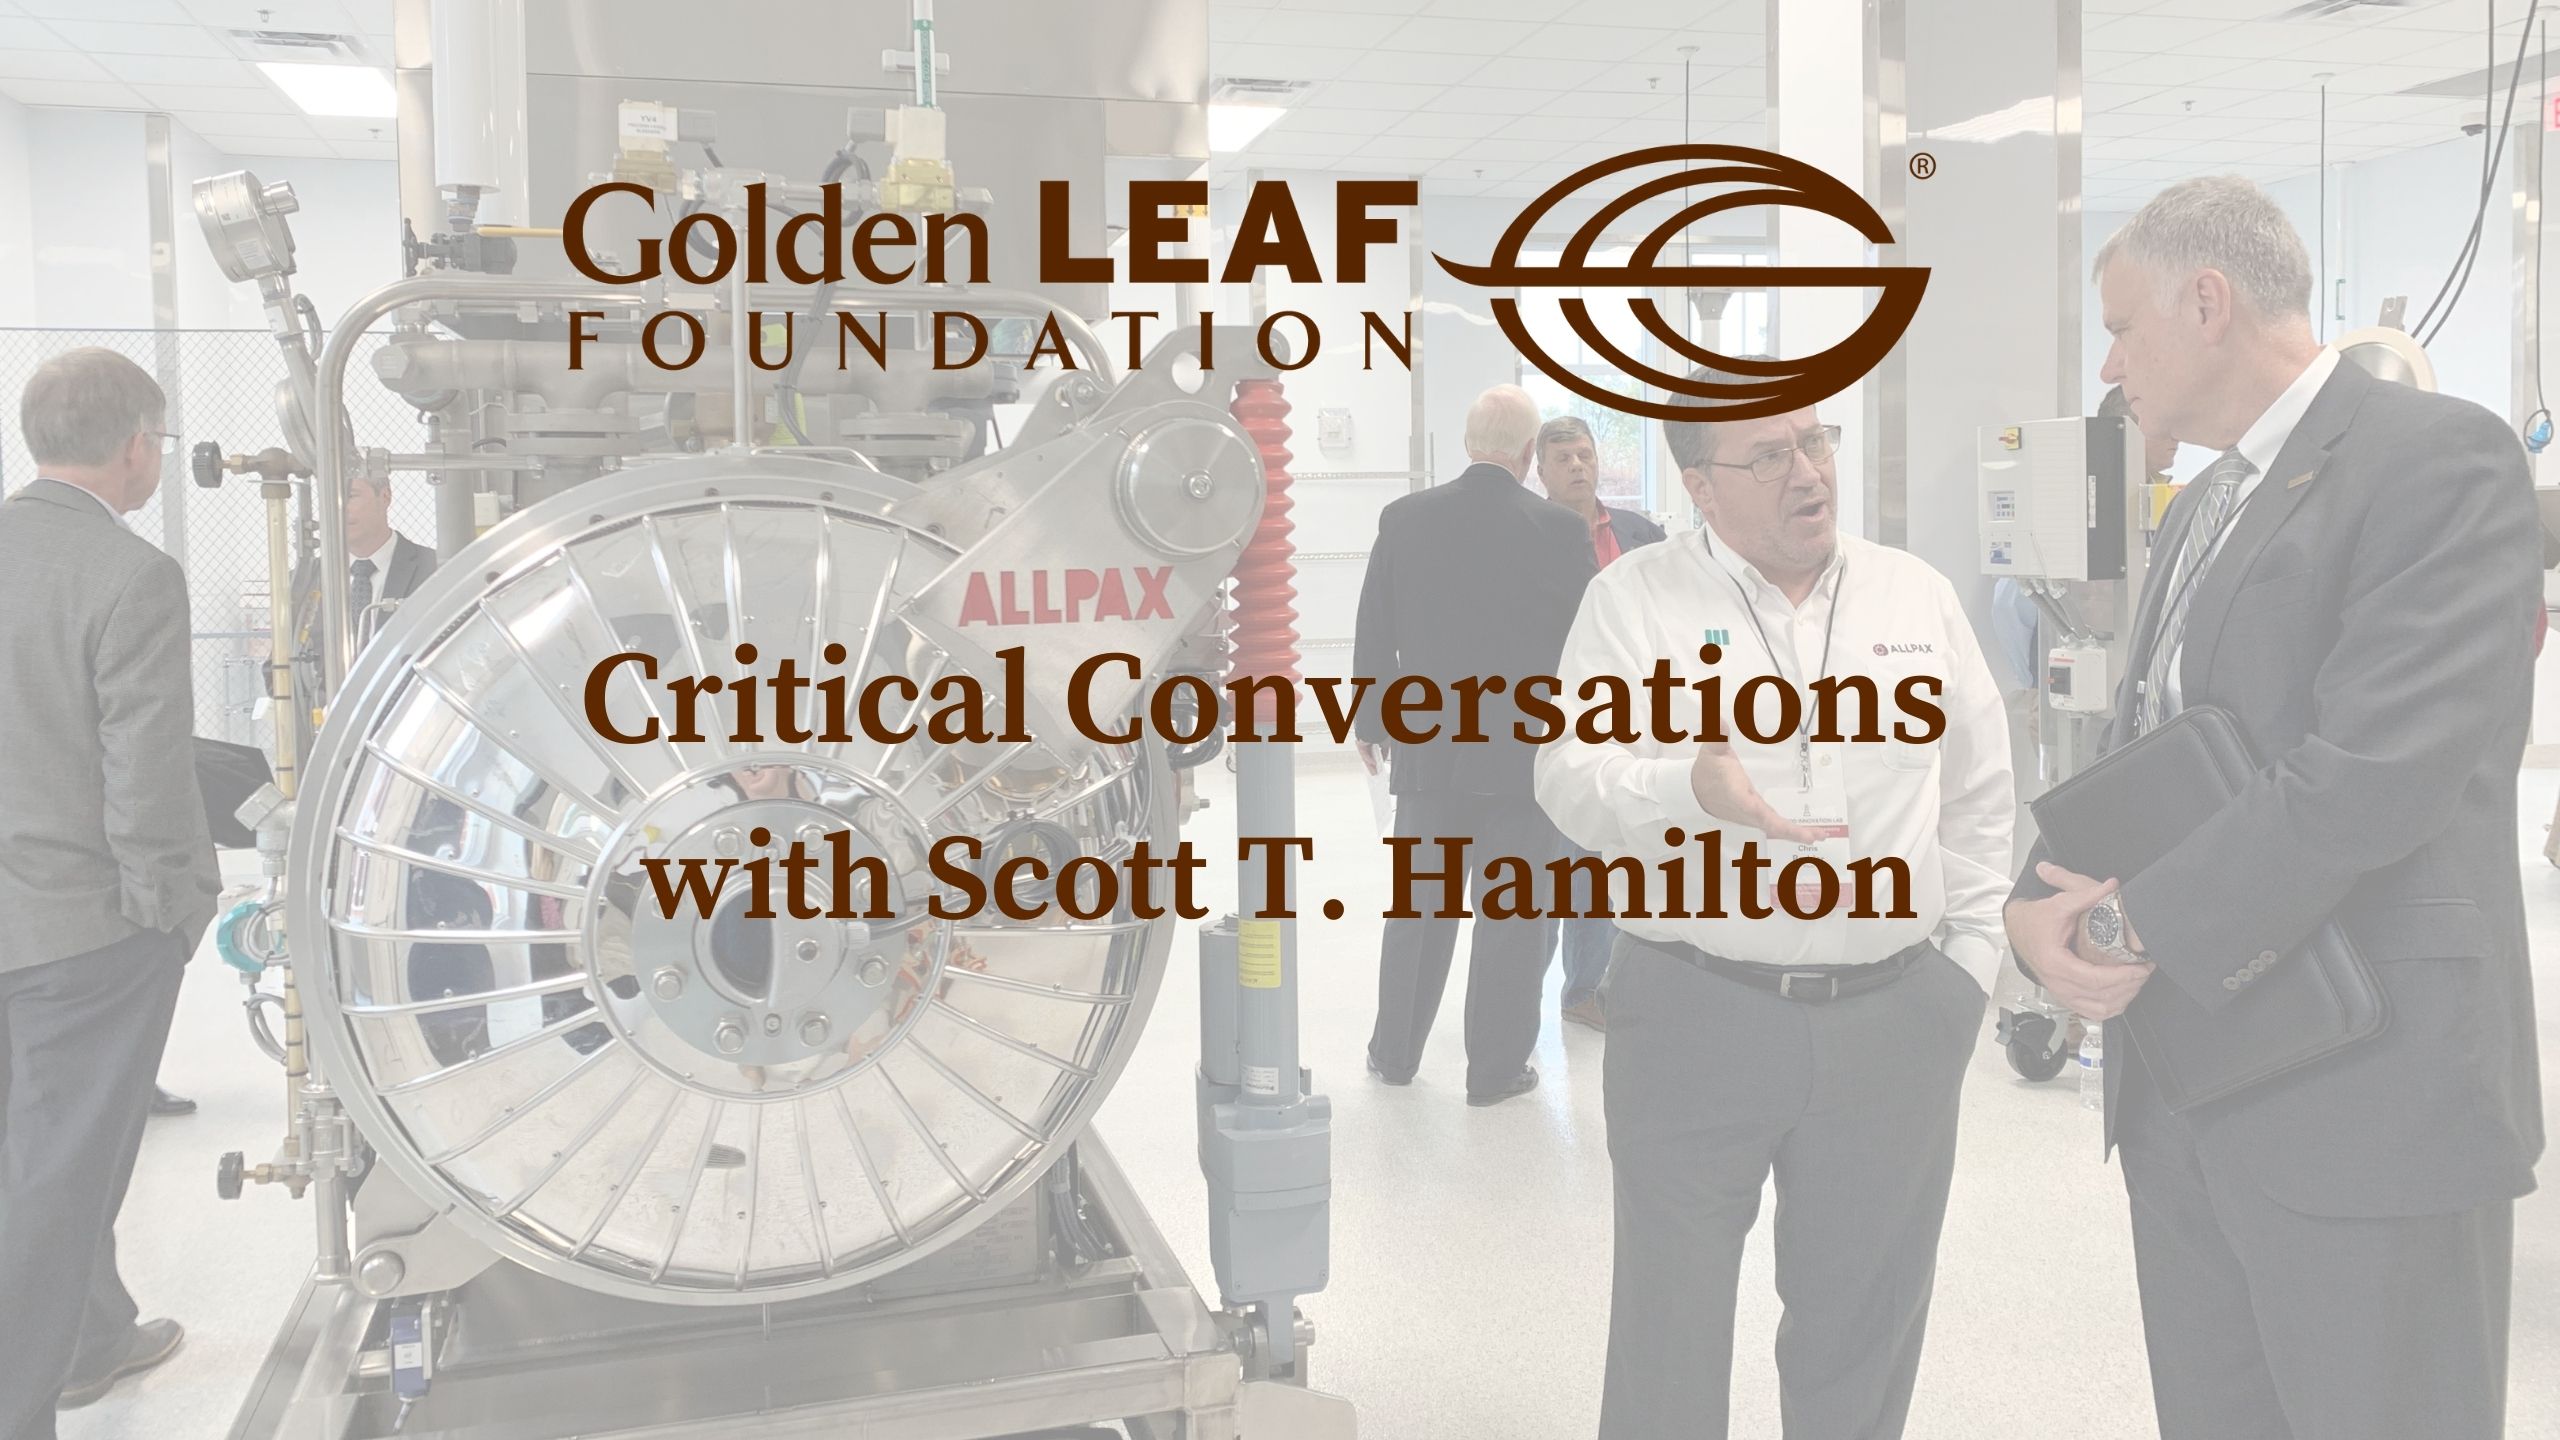 Critical Conversations with Scott T. Hamilton featuring Christopher Chung, CEO of EDPNC